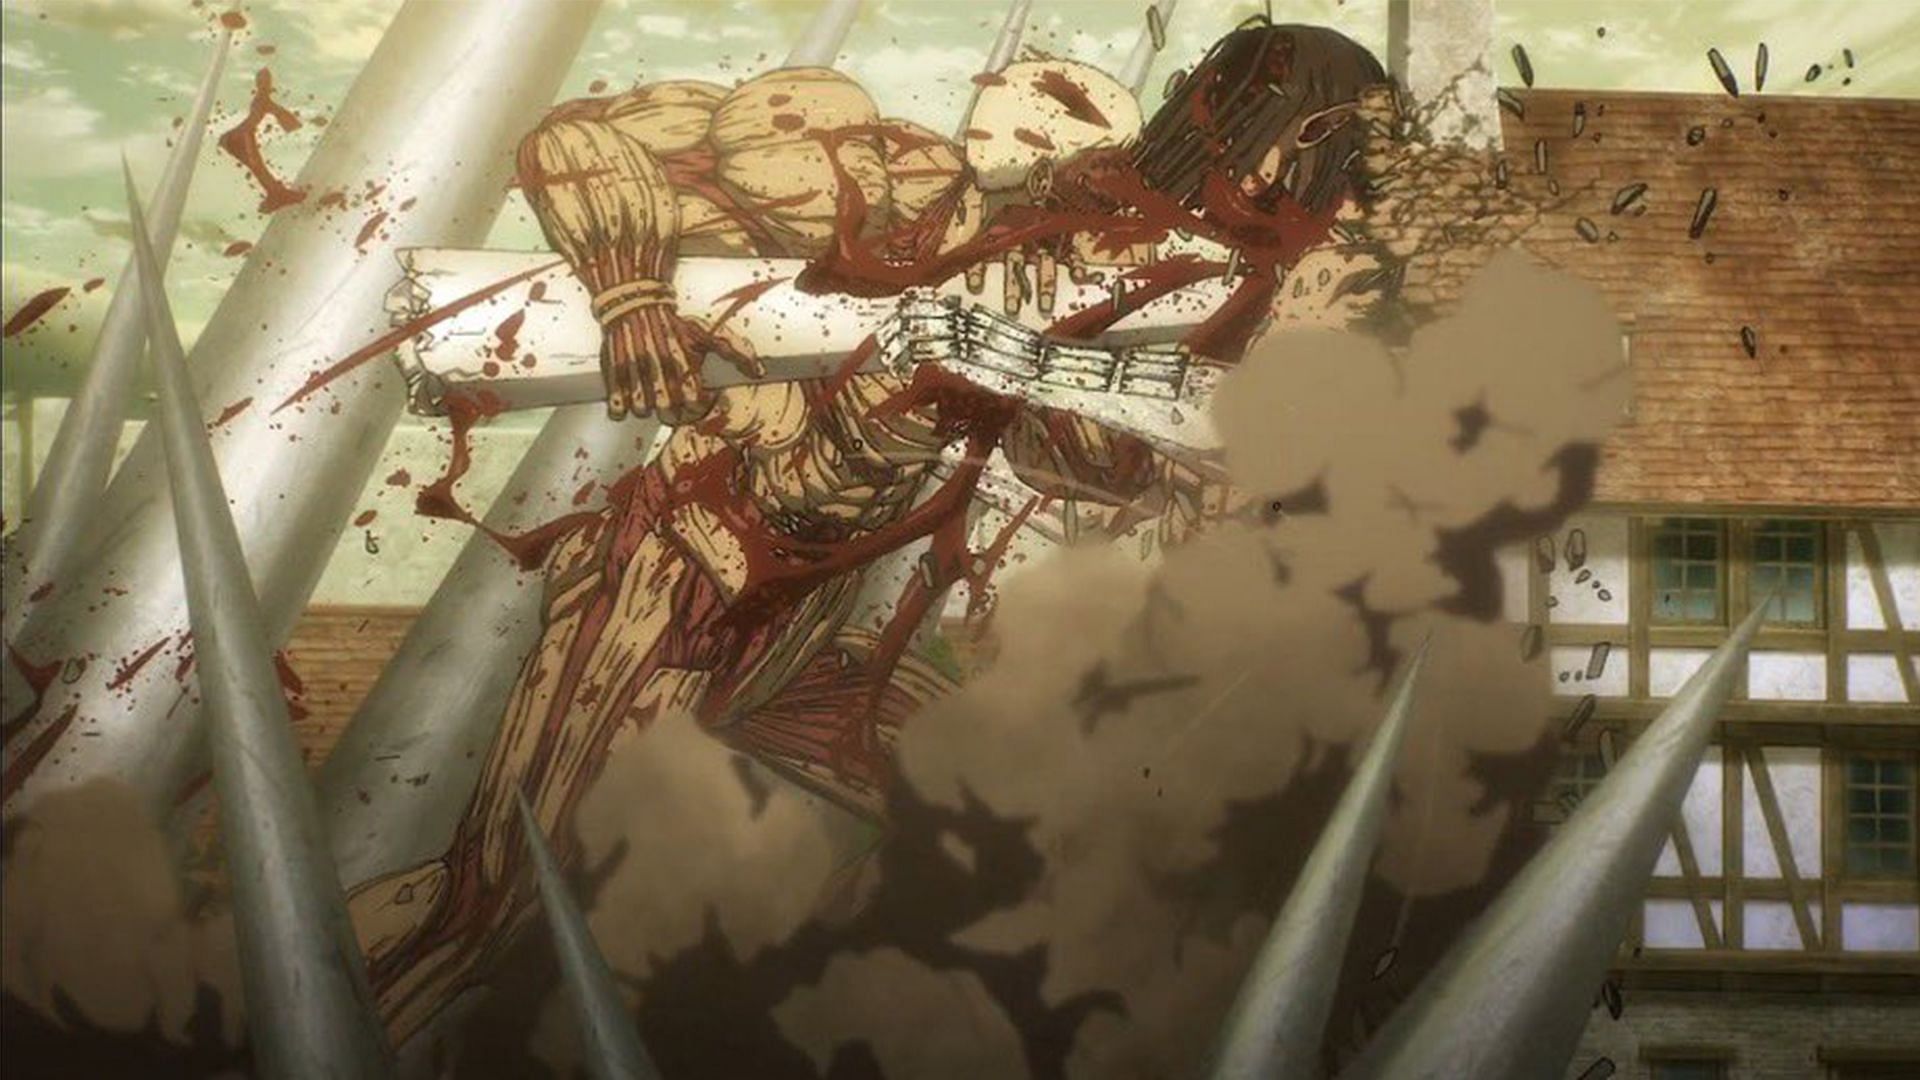 Attack On Titan Final Season: Twitter goes berserk as one of the greatest animes inches closer towards its conclusion (Image via Twitter/ @Kid_Kass)